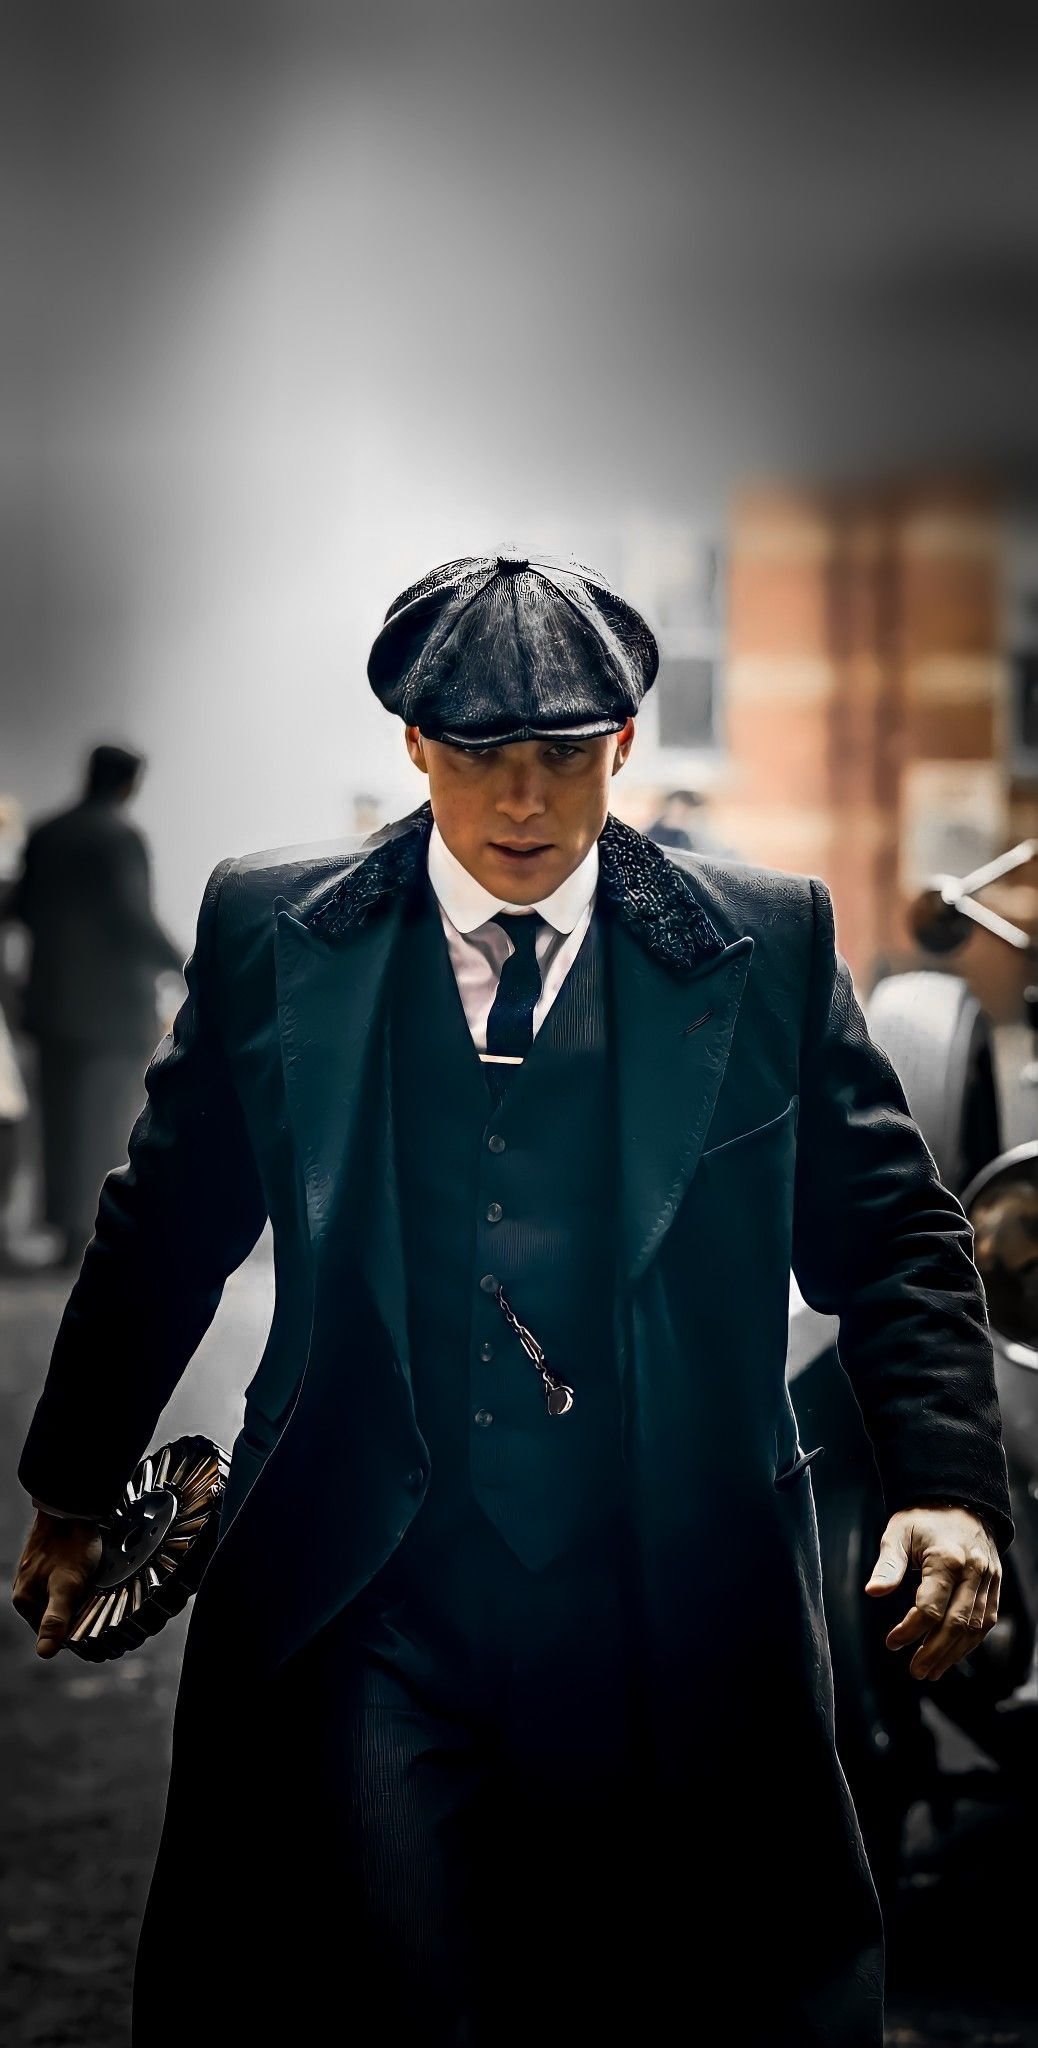 Thomas Shelby Wallpaper Download